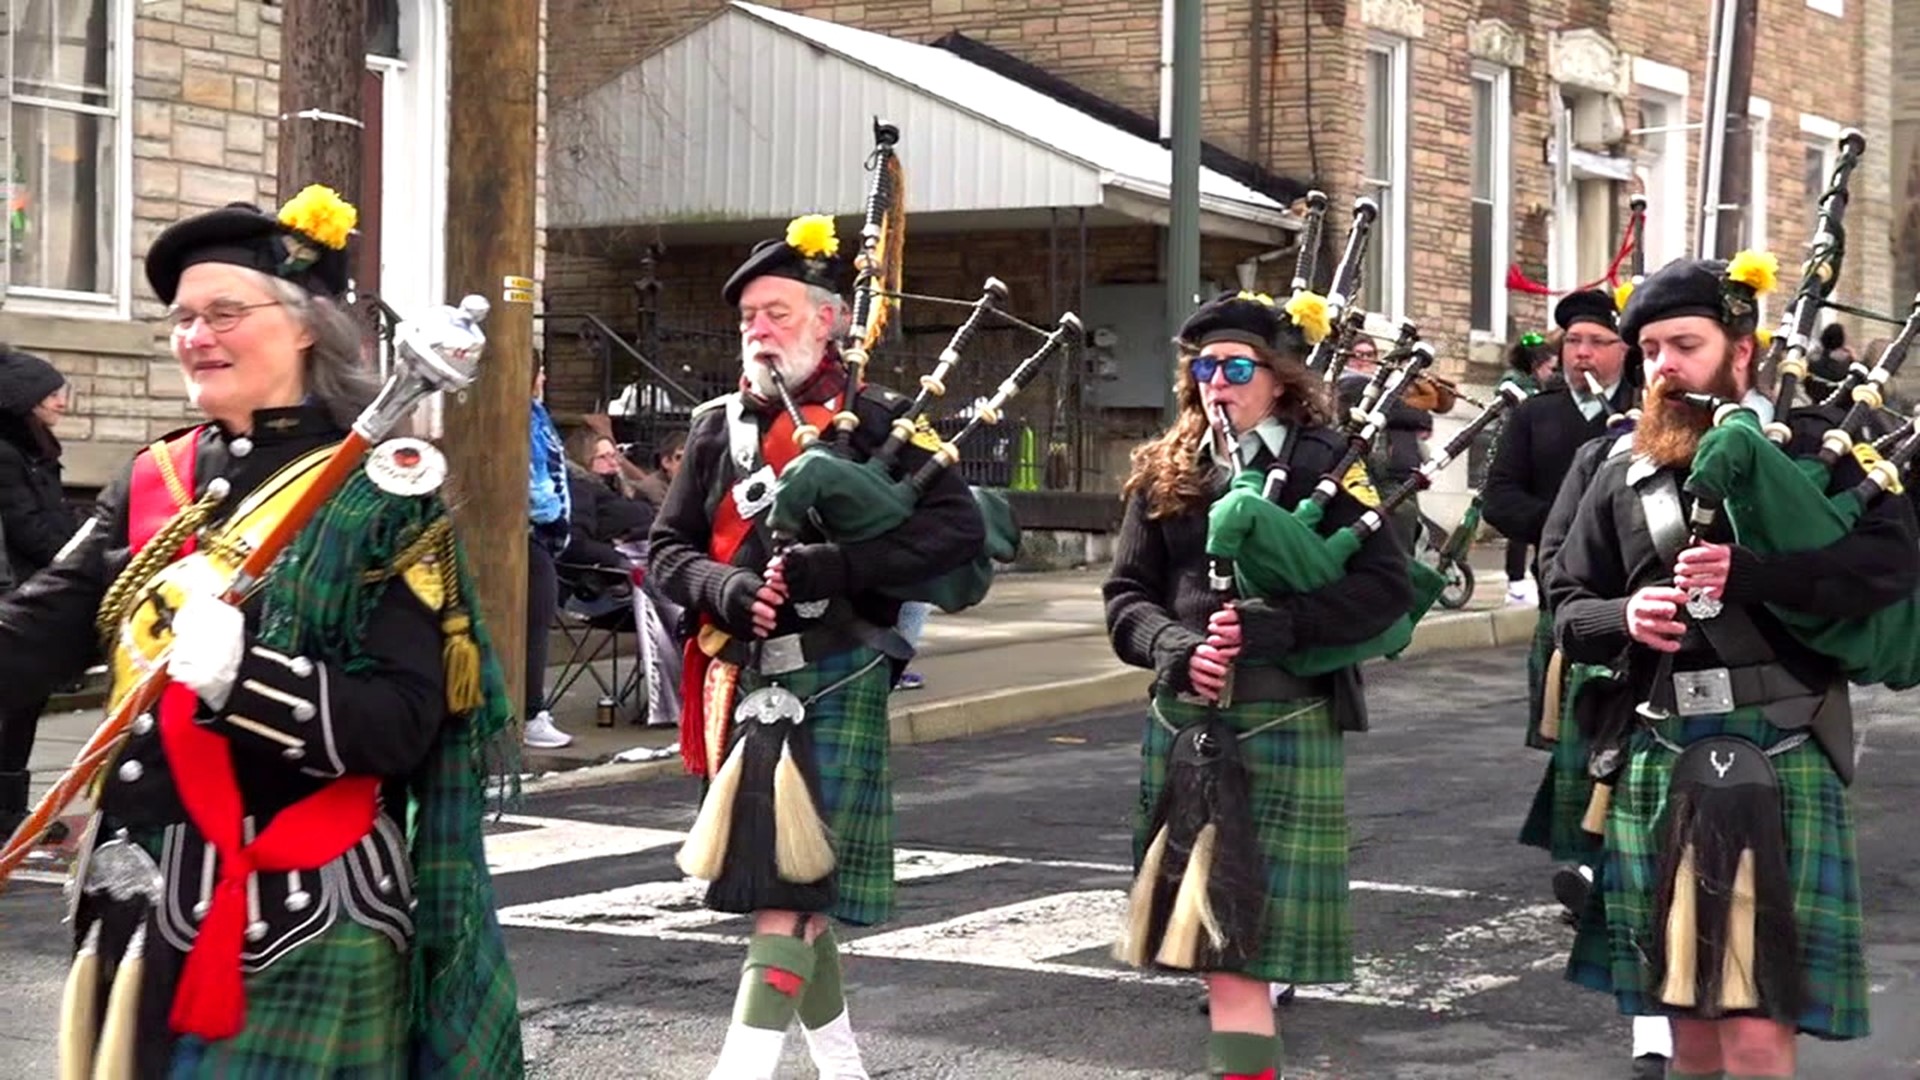 In honor of St. Patrick, a parade graced the streets of Pottsville in Schuylkill County, the first St. Patrick's Day Parade in the city since the pandemic.